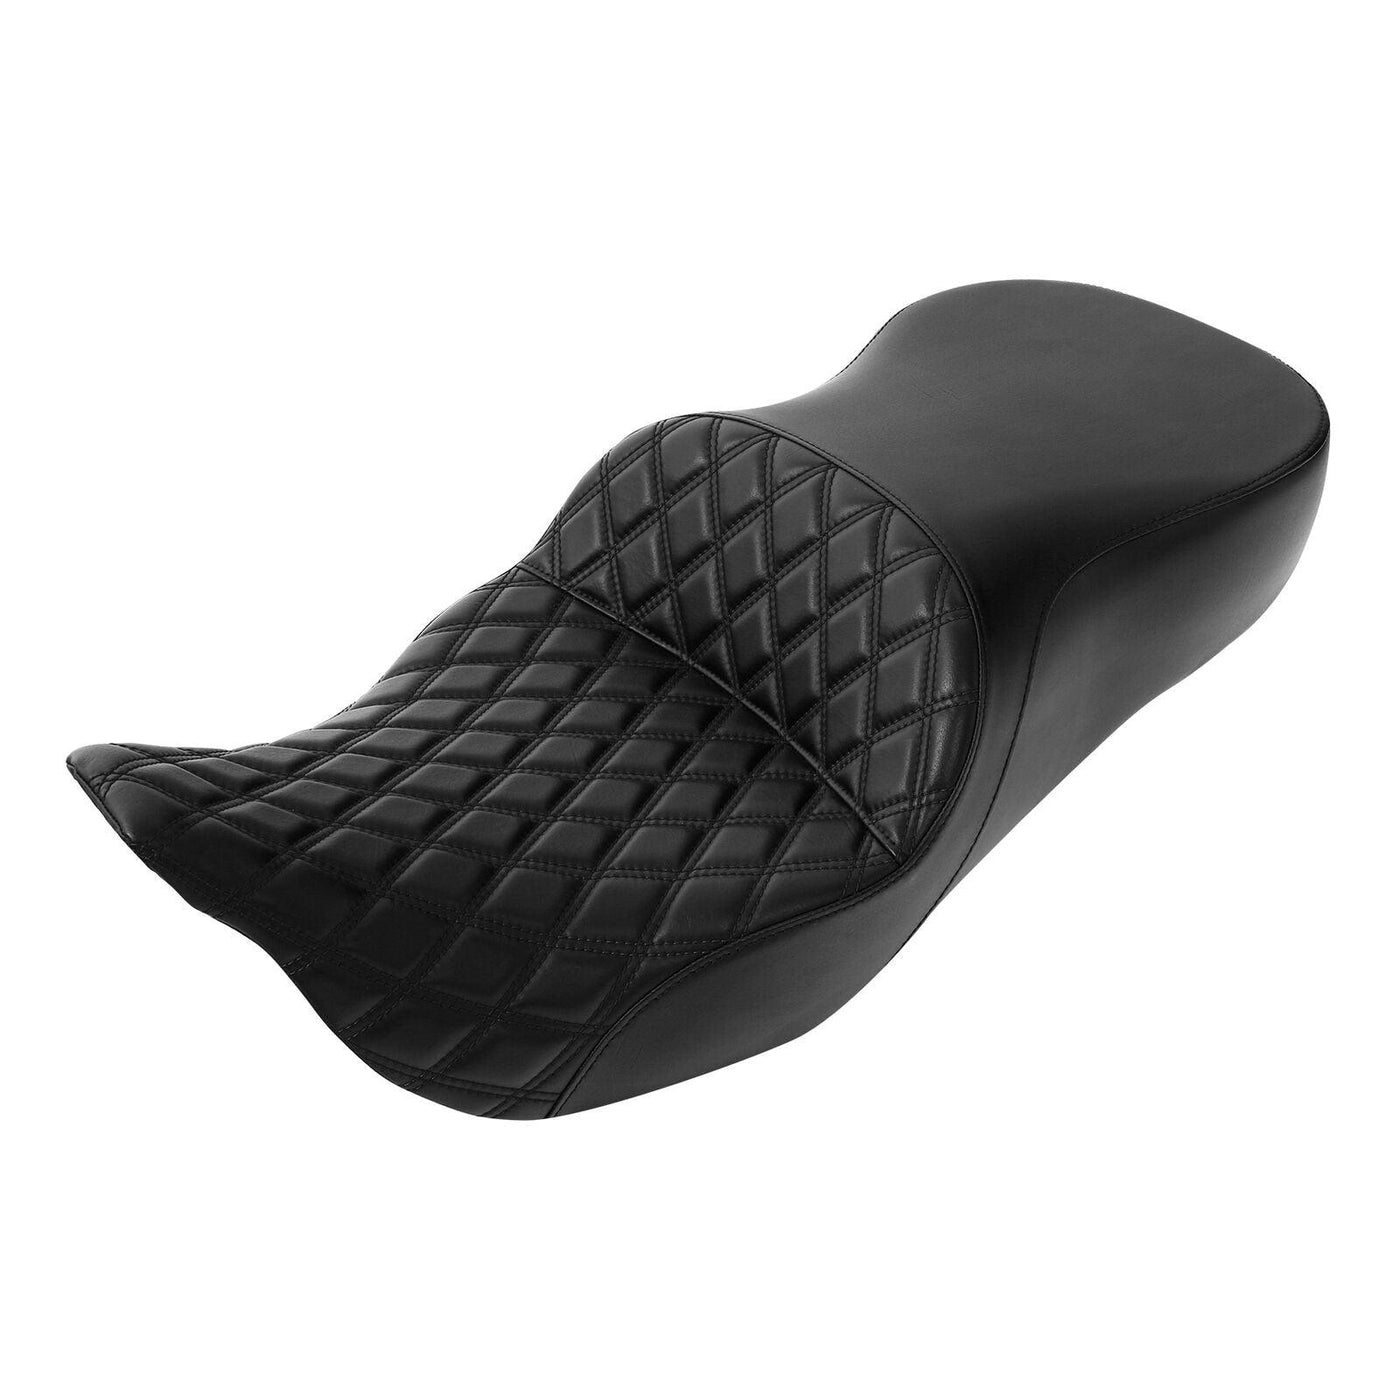 Driver Passenger 2 Up Seat Fit For Harley Touring Road Glide 2009-2022 2021 2020 - Moto Life Products